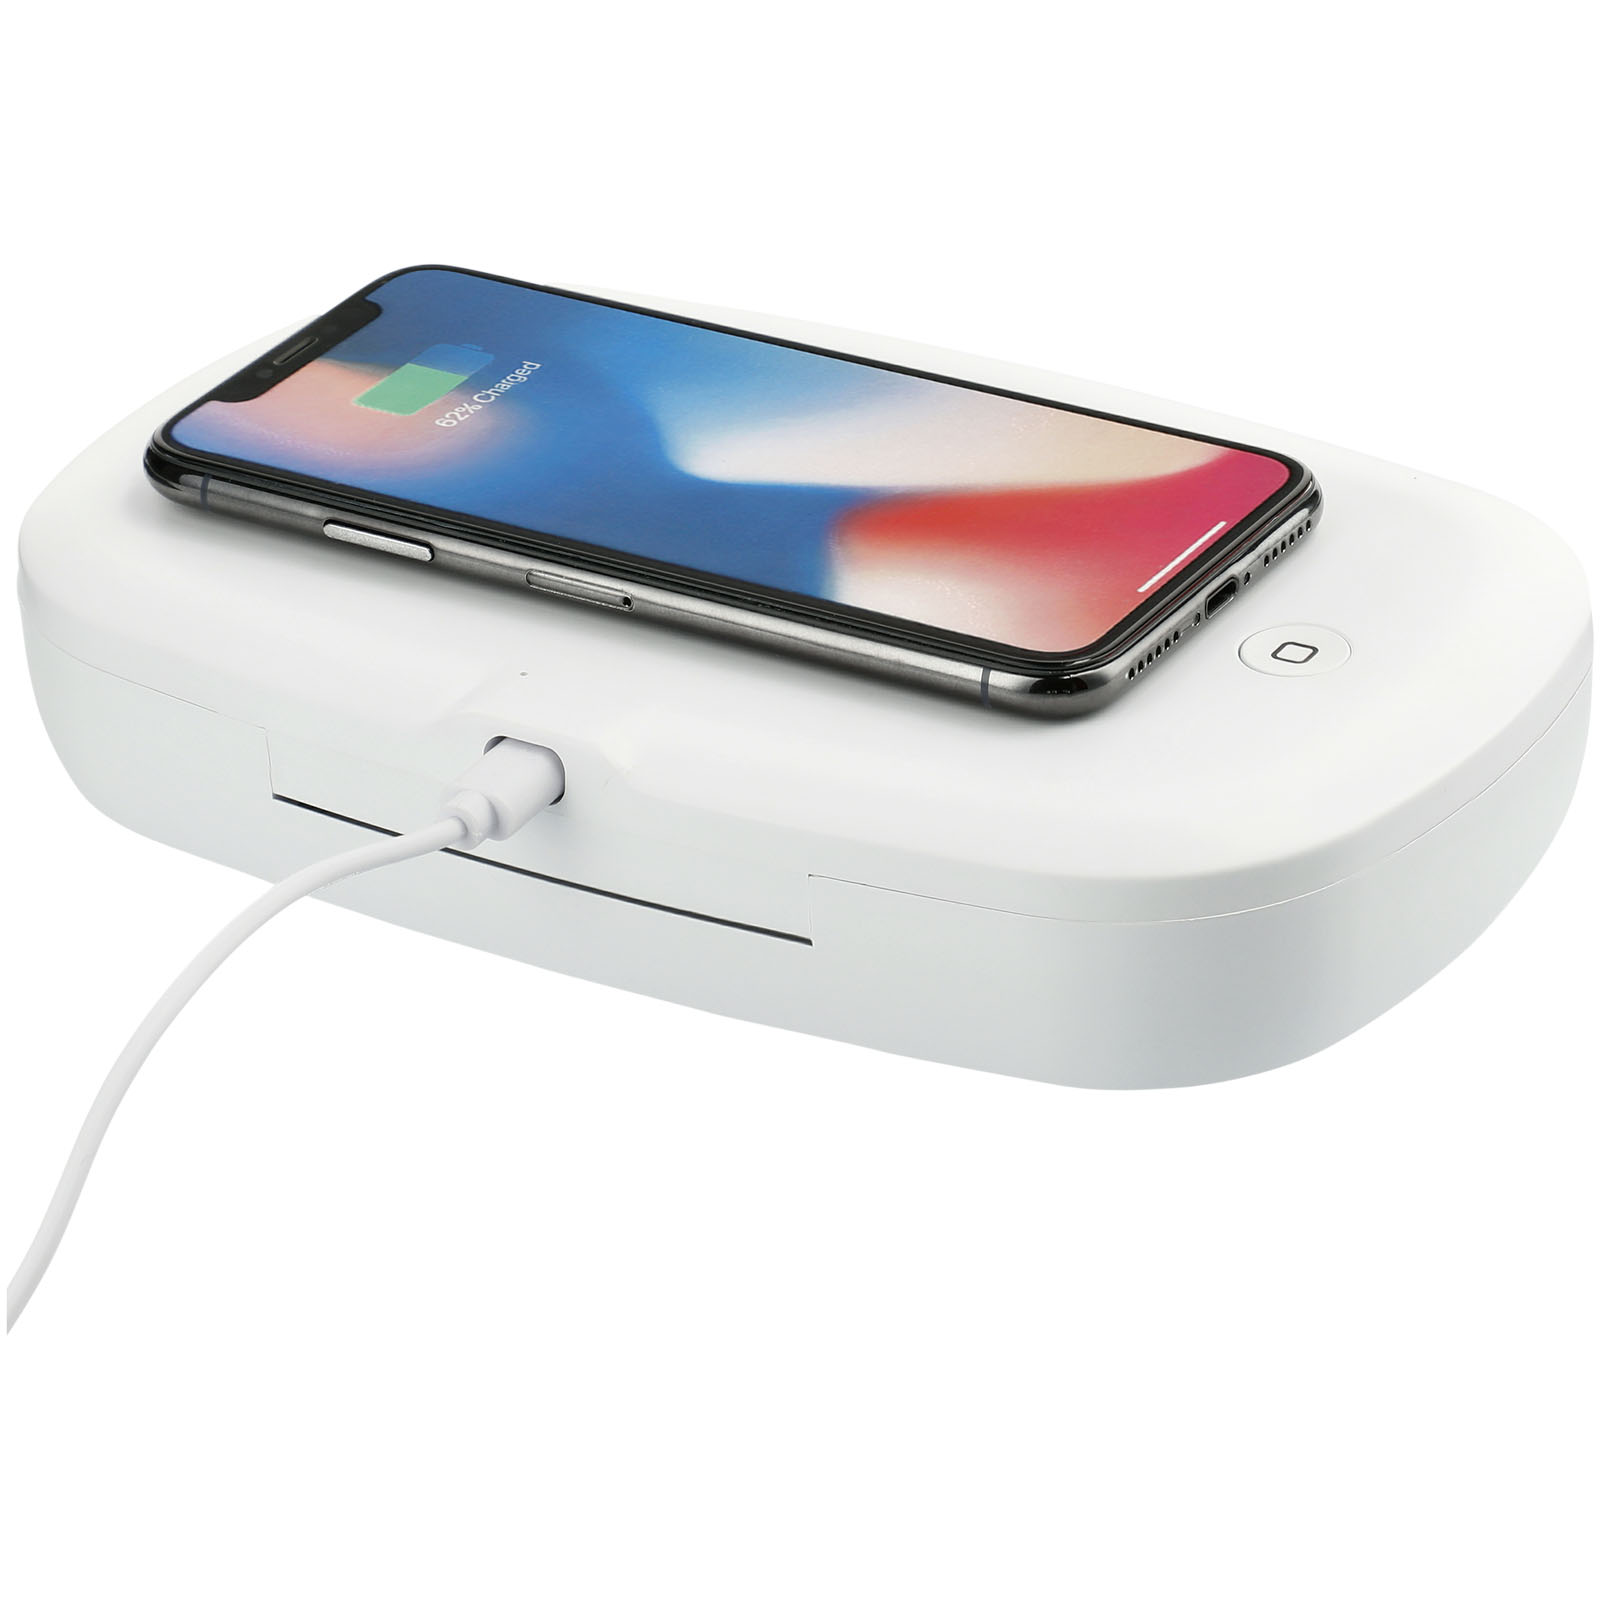 Advertising Wireless Charging - Capsule UV smartphone sanitizer with 5W wireless charging pad - 5